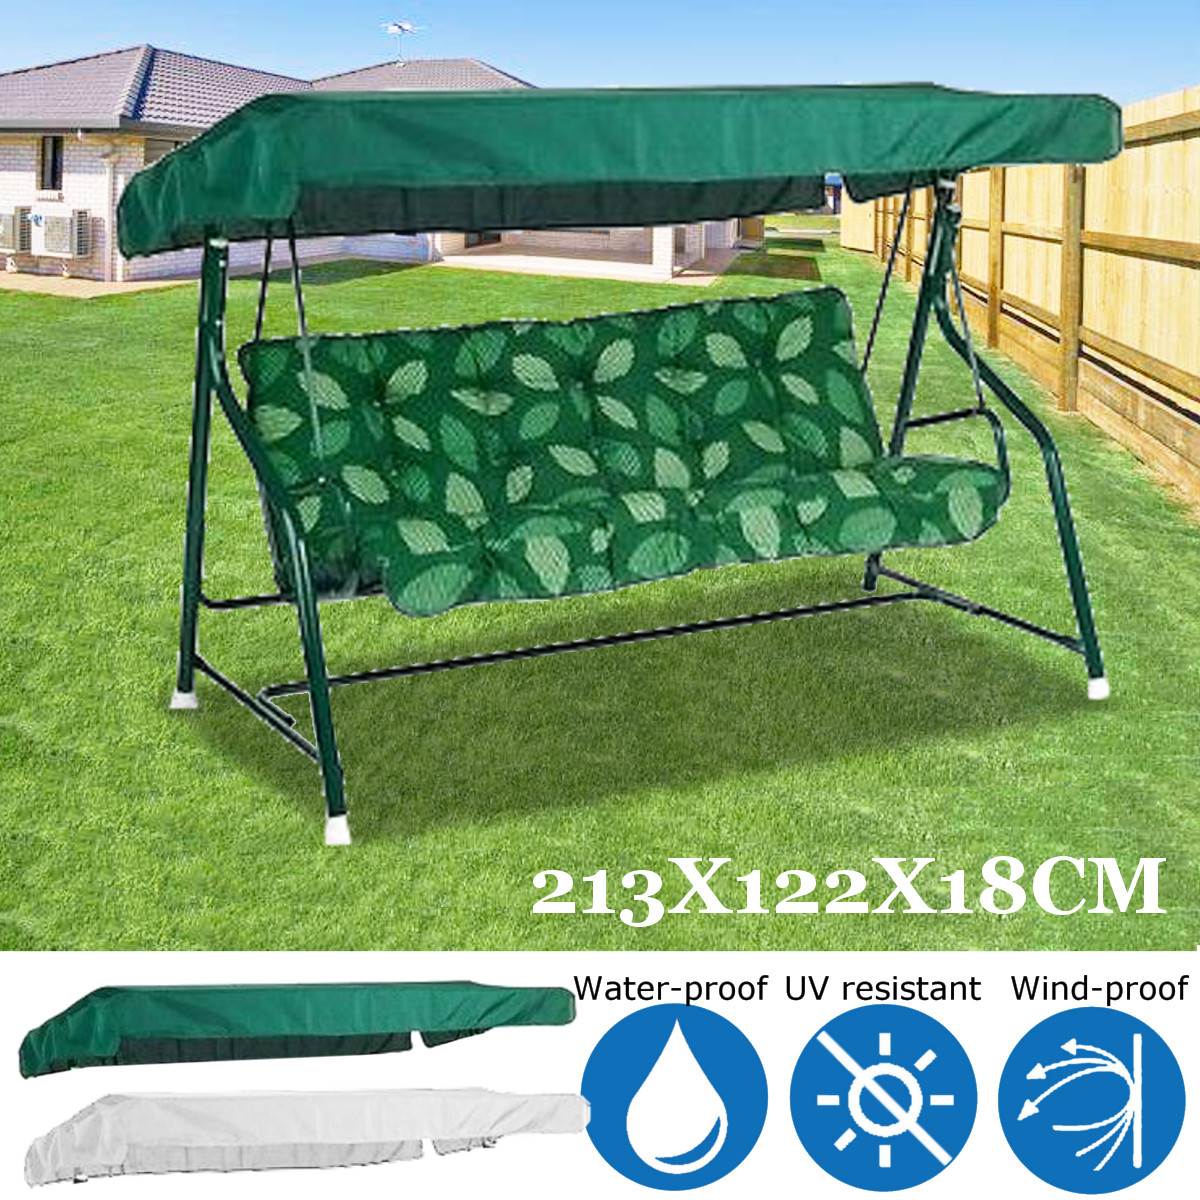 Courtyard Garden Swing Hammock 3-Seater Chair Cover Waterproof Protection Patio